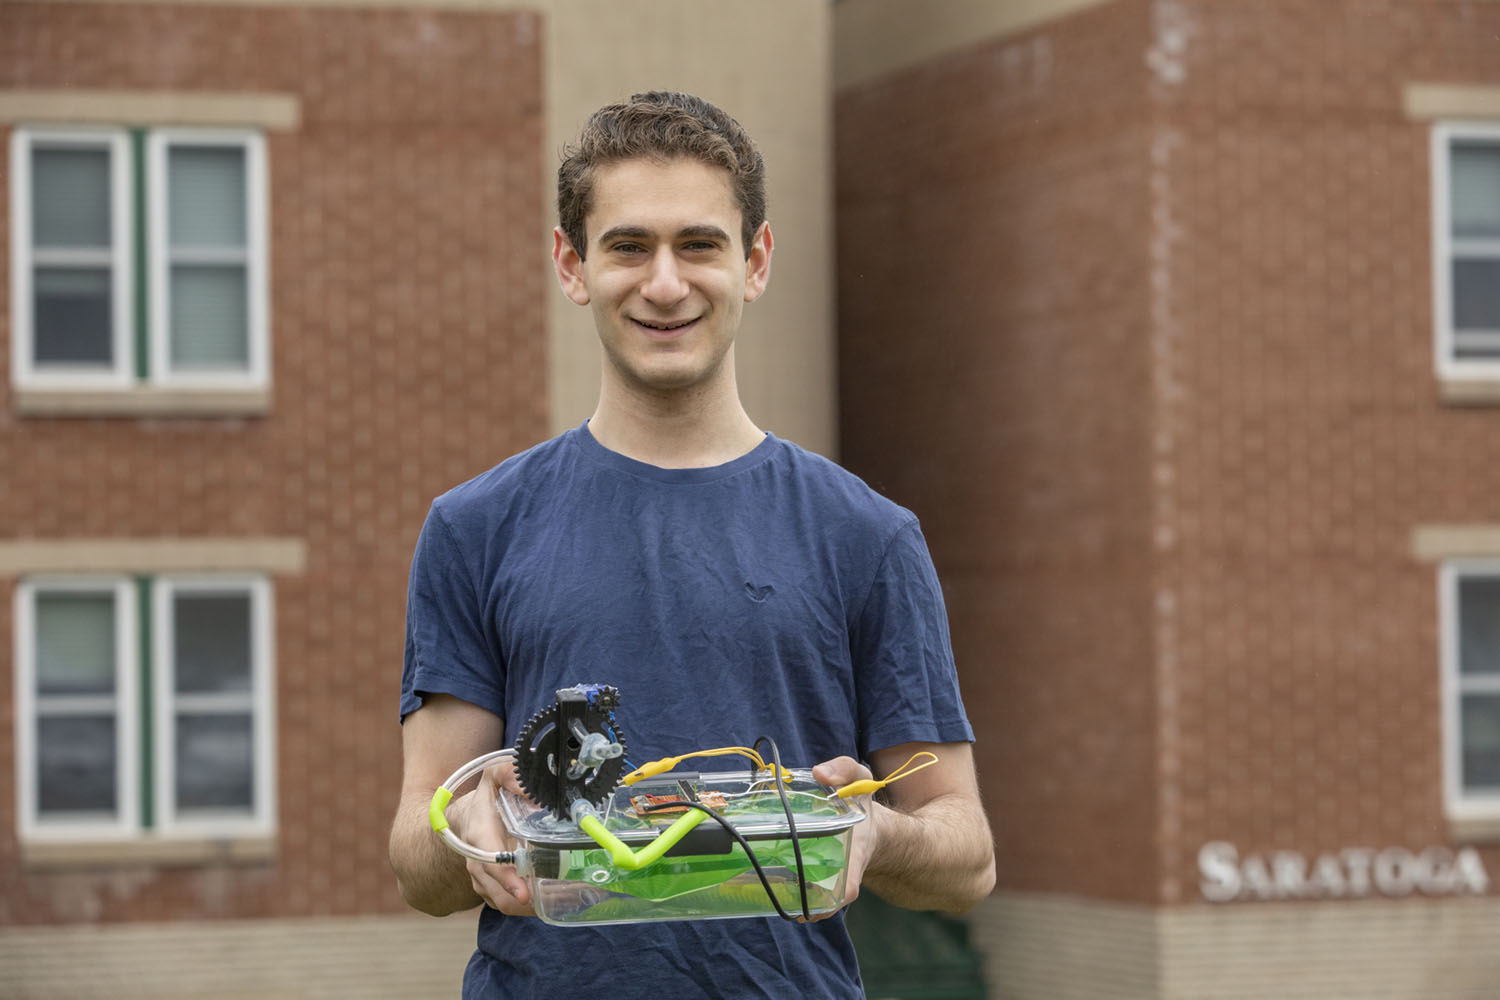 Jacob Goodman, a junior studying mechanical engineering at Thomas J. Watson School of Engineering and Applied Science, made a ventilator at his Saratoga residence in the Hillside Community mainly using items he bought at Walmart.